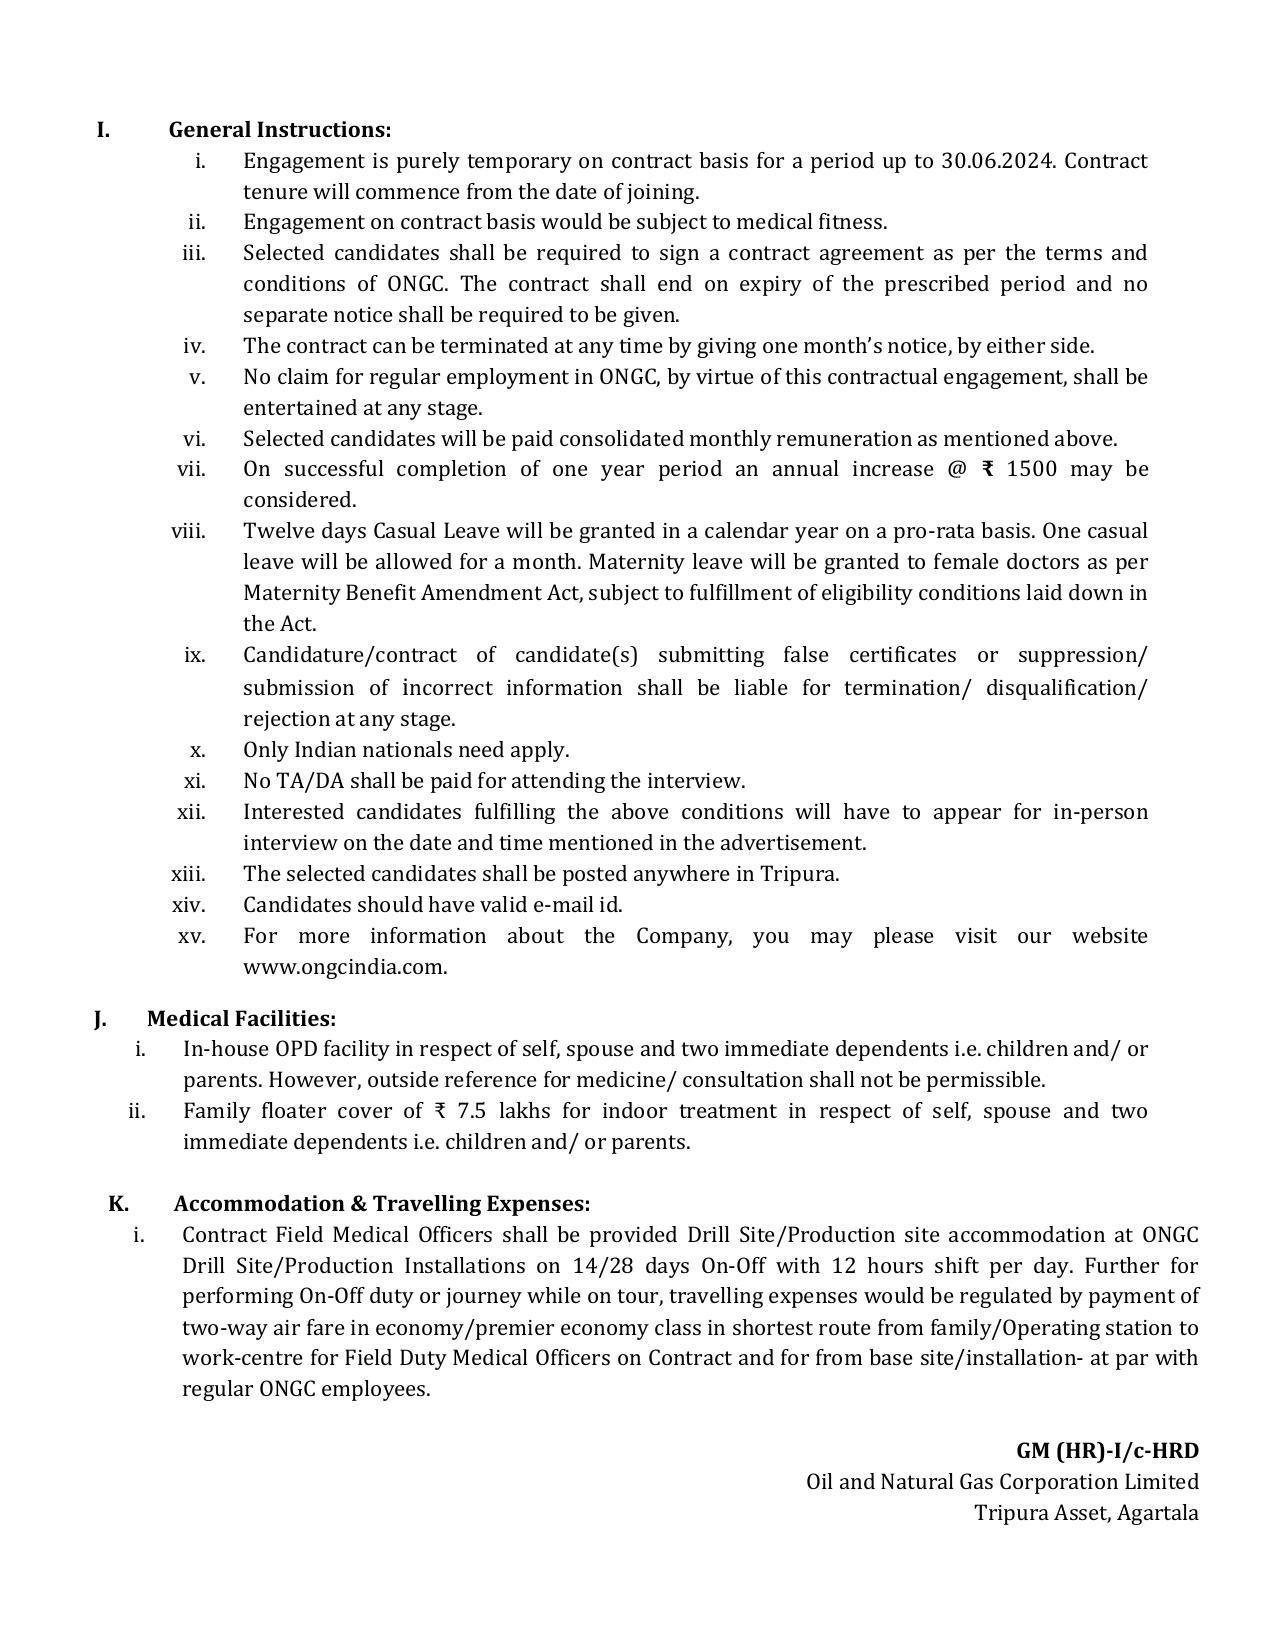 ONGC Invites Application for Contract Medical Officer Recruitment 2023 - Page 4